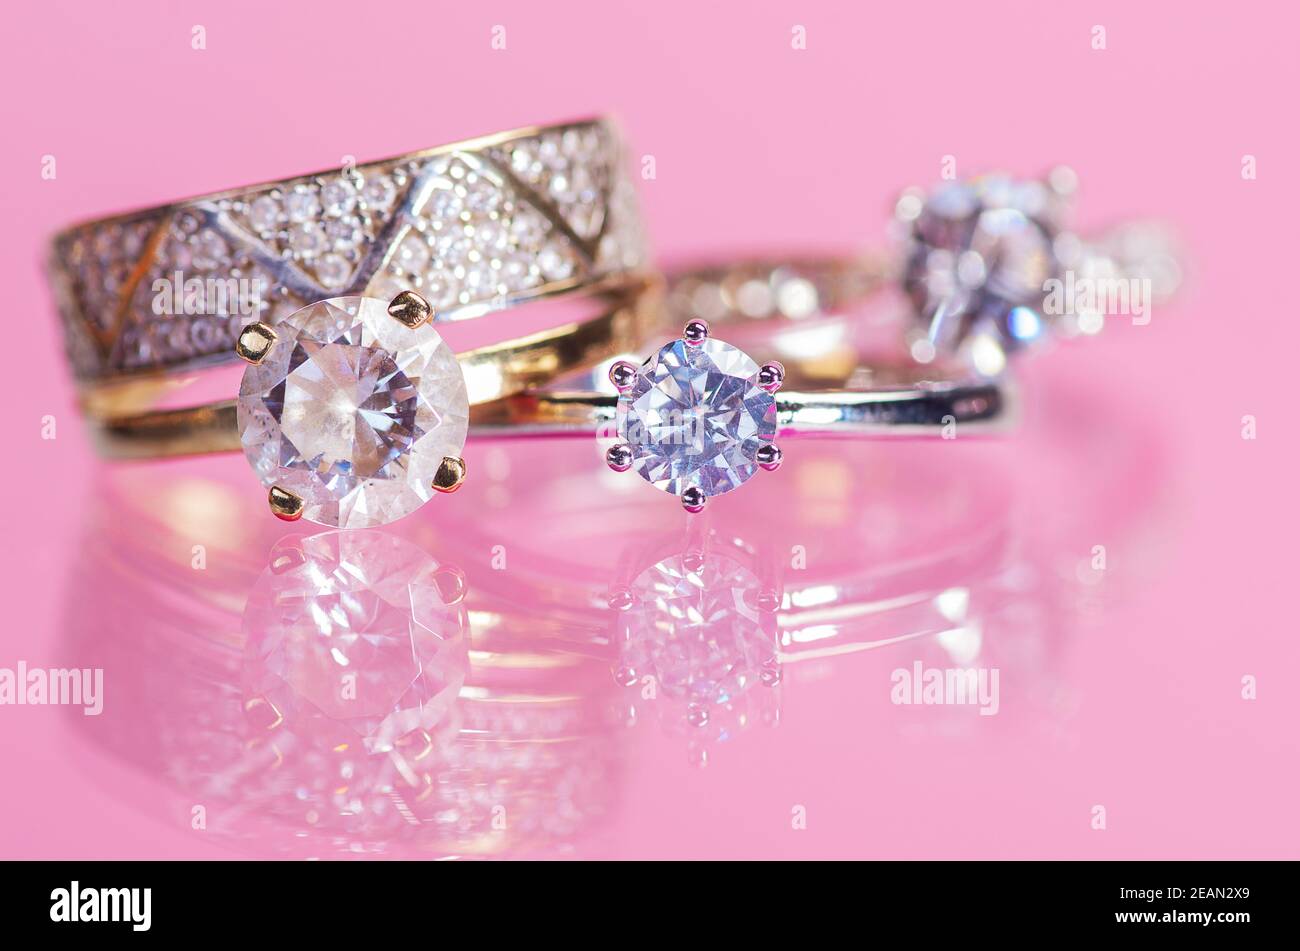 Rings with crystals on a pink background. Stock Photo